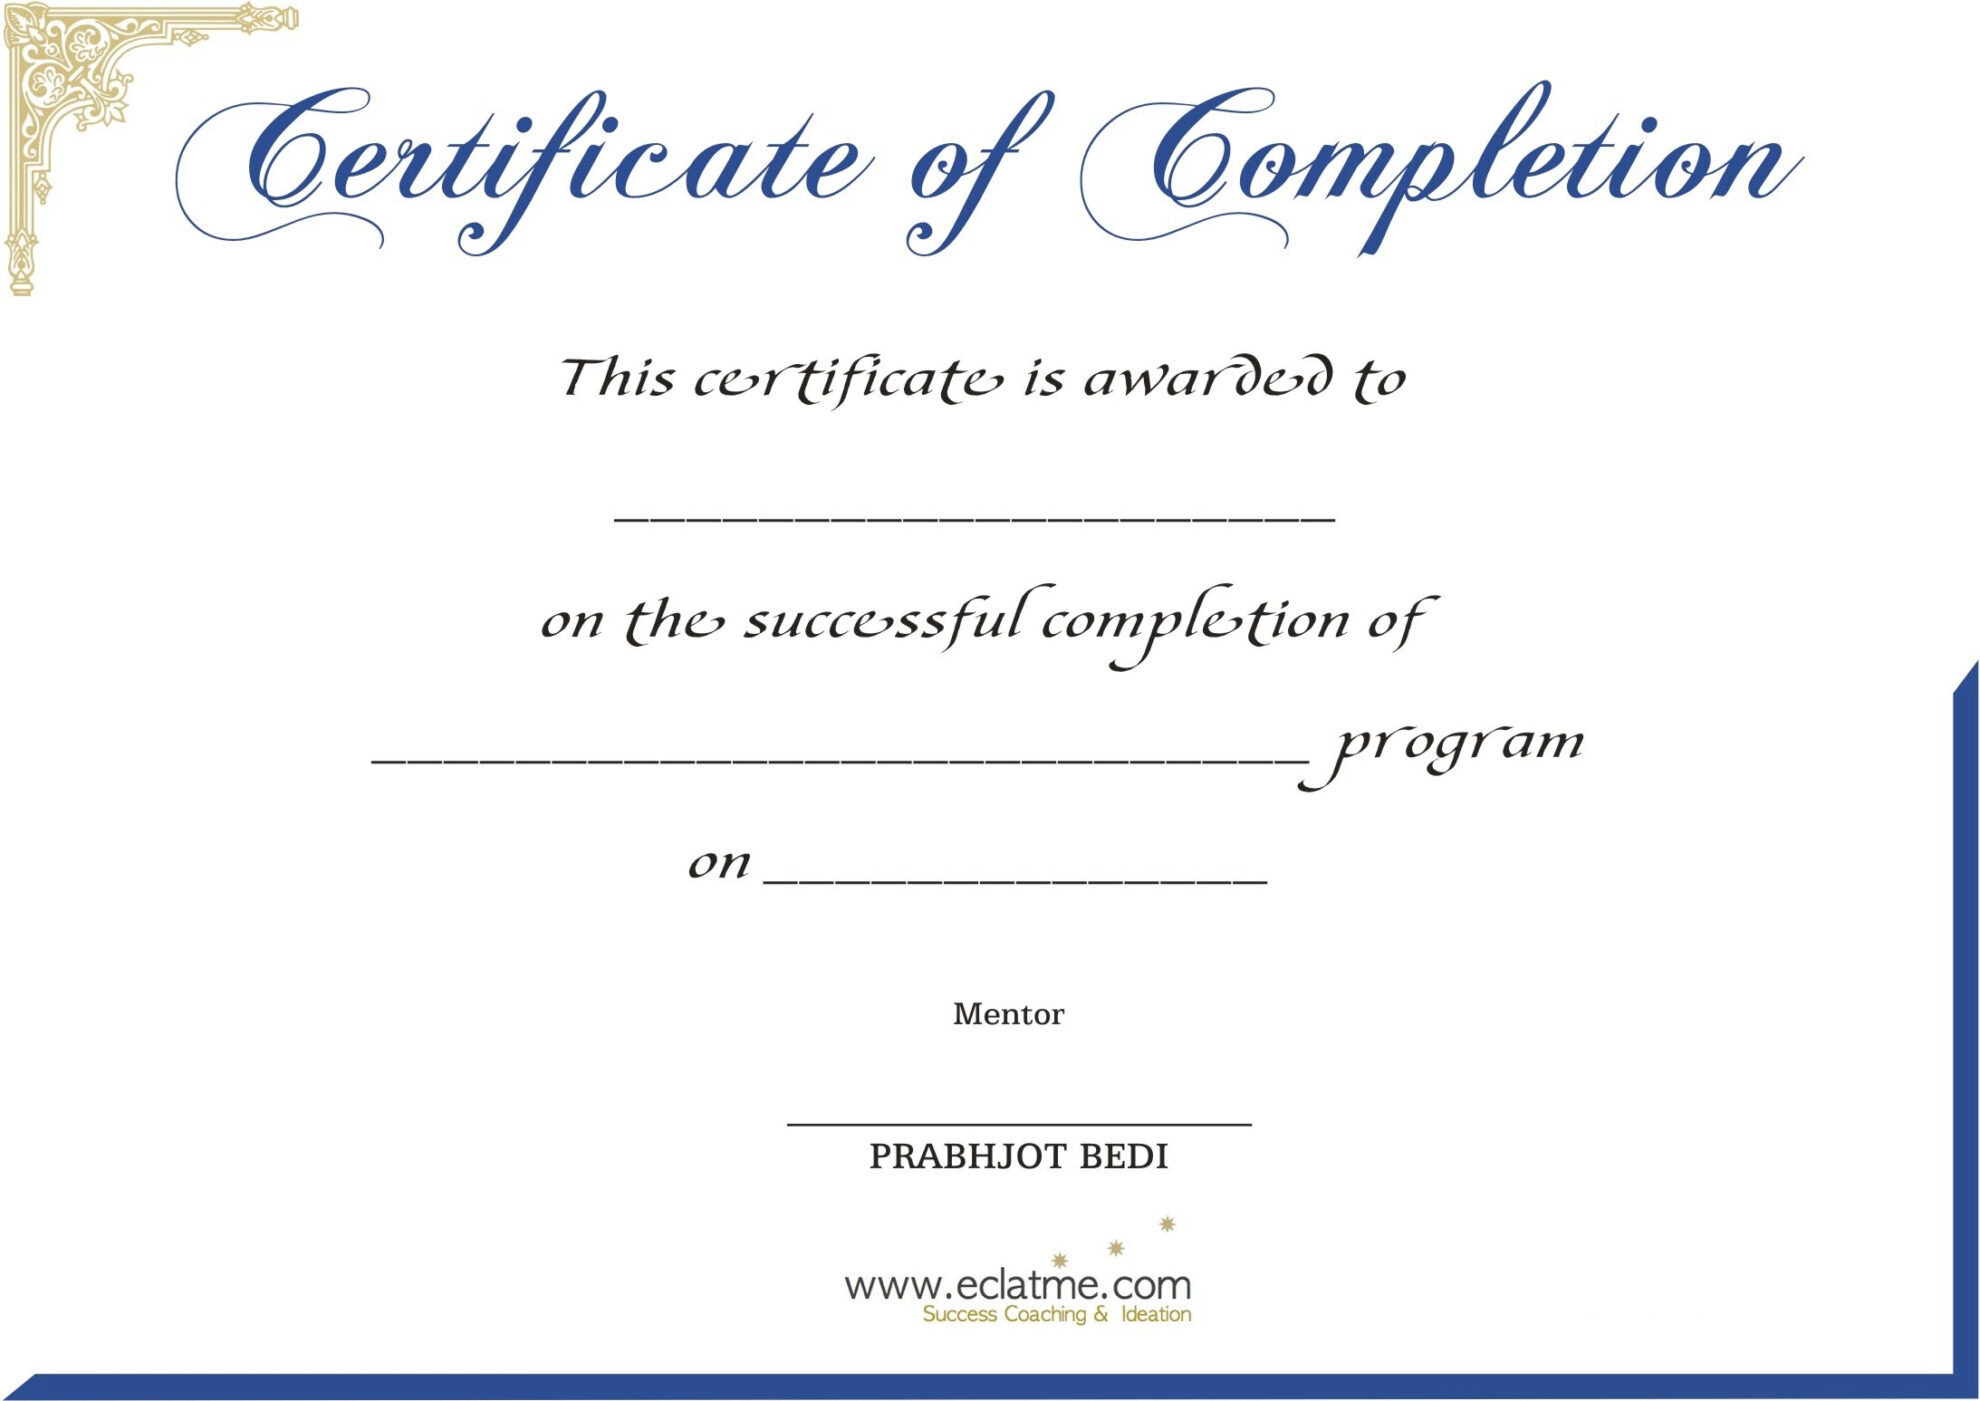 certificate of completion template free download in word